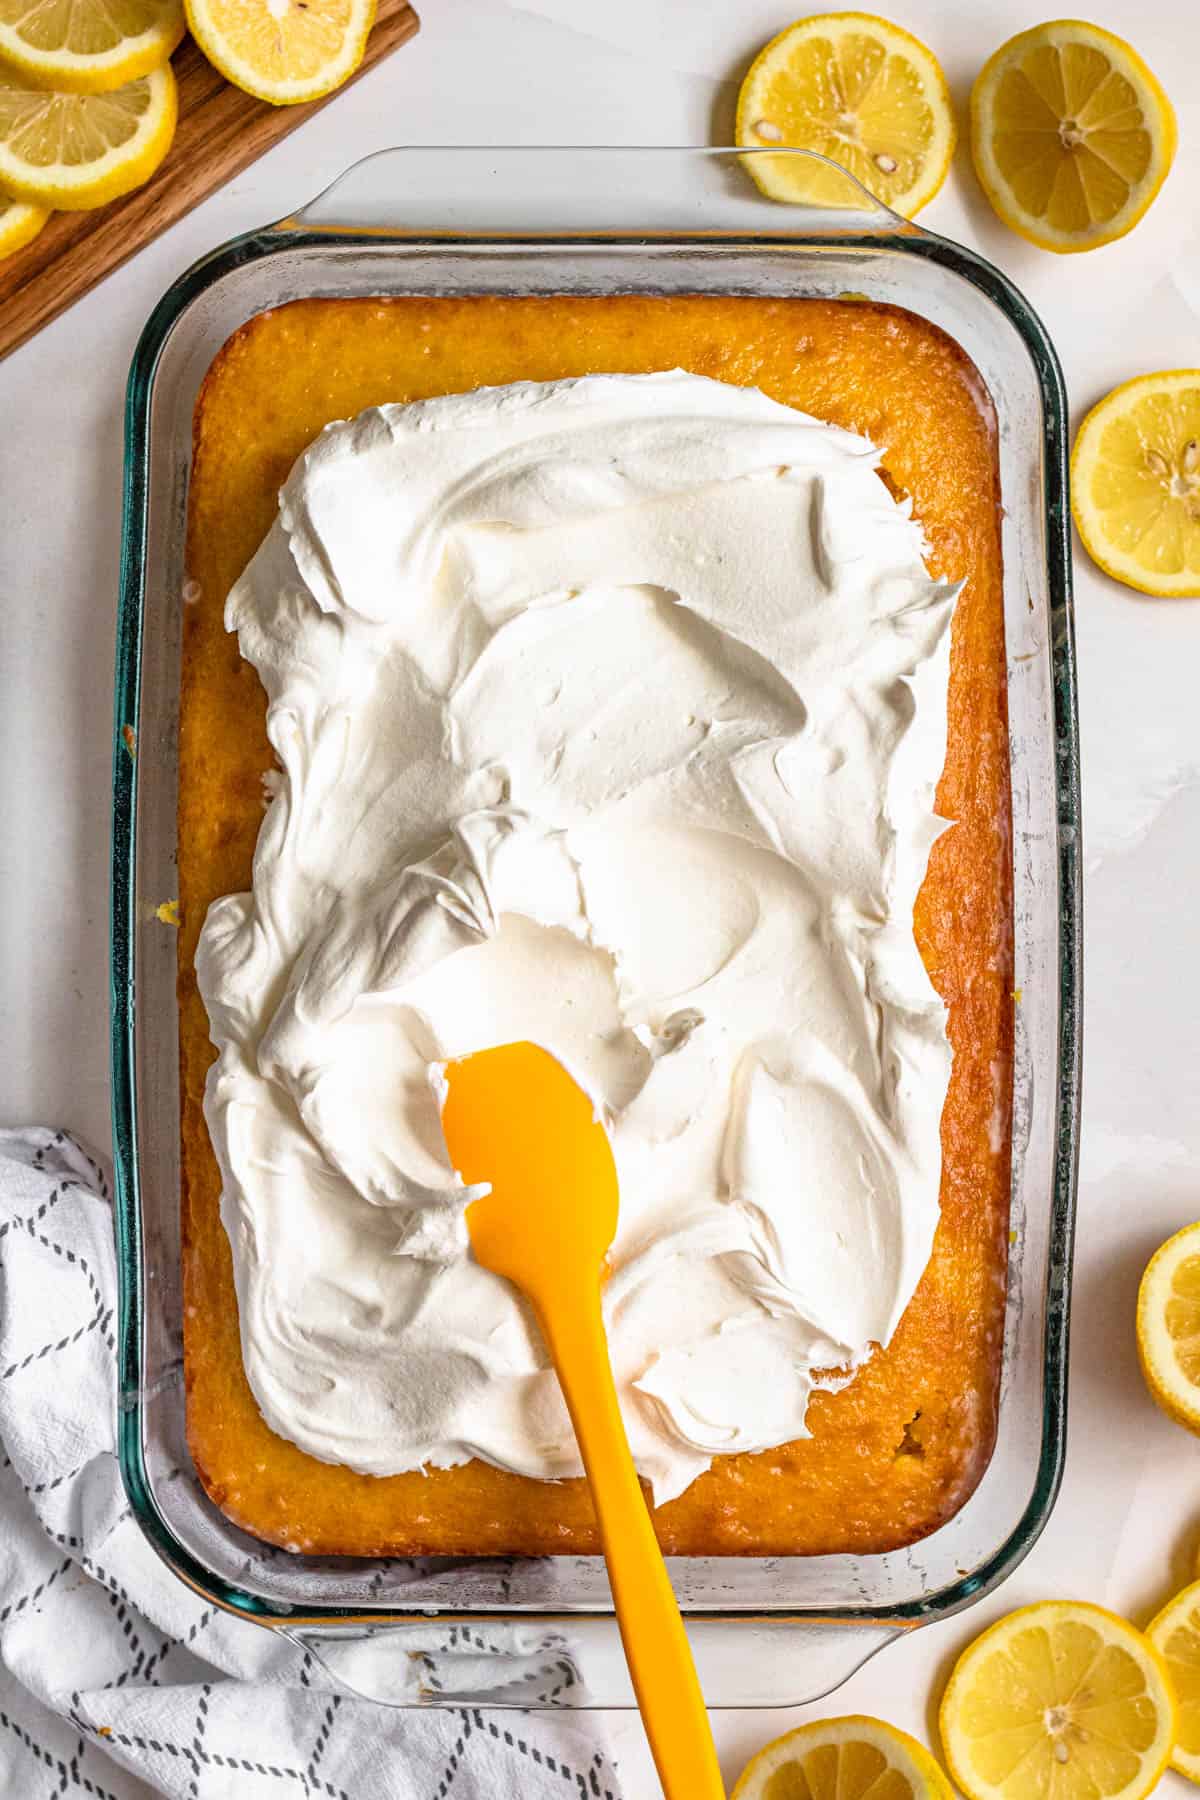 Lemon cake recipe with whipped topping being spread over the baked lemon cake. 